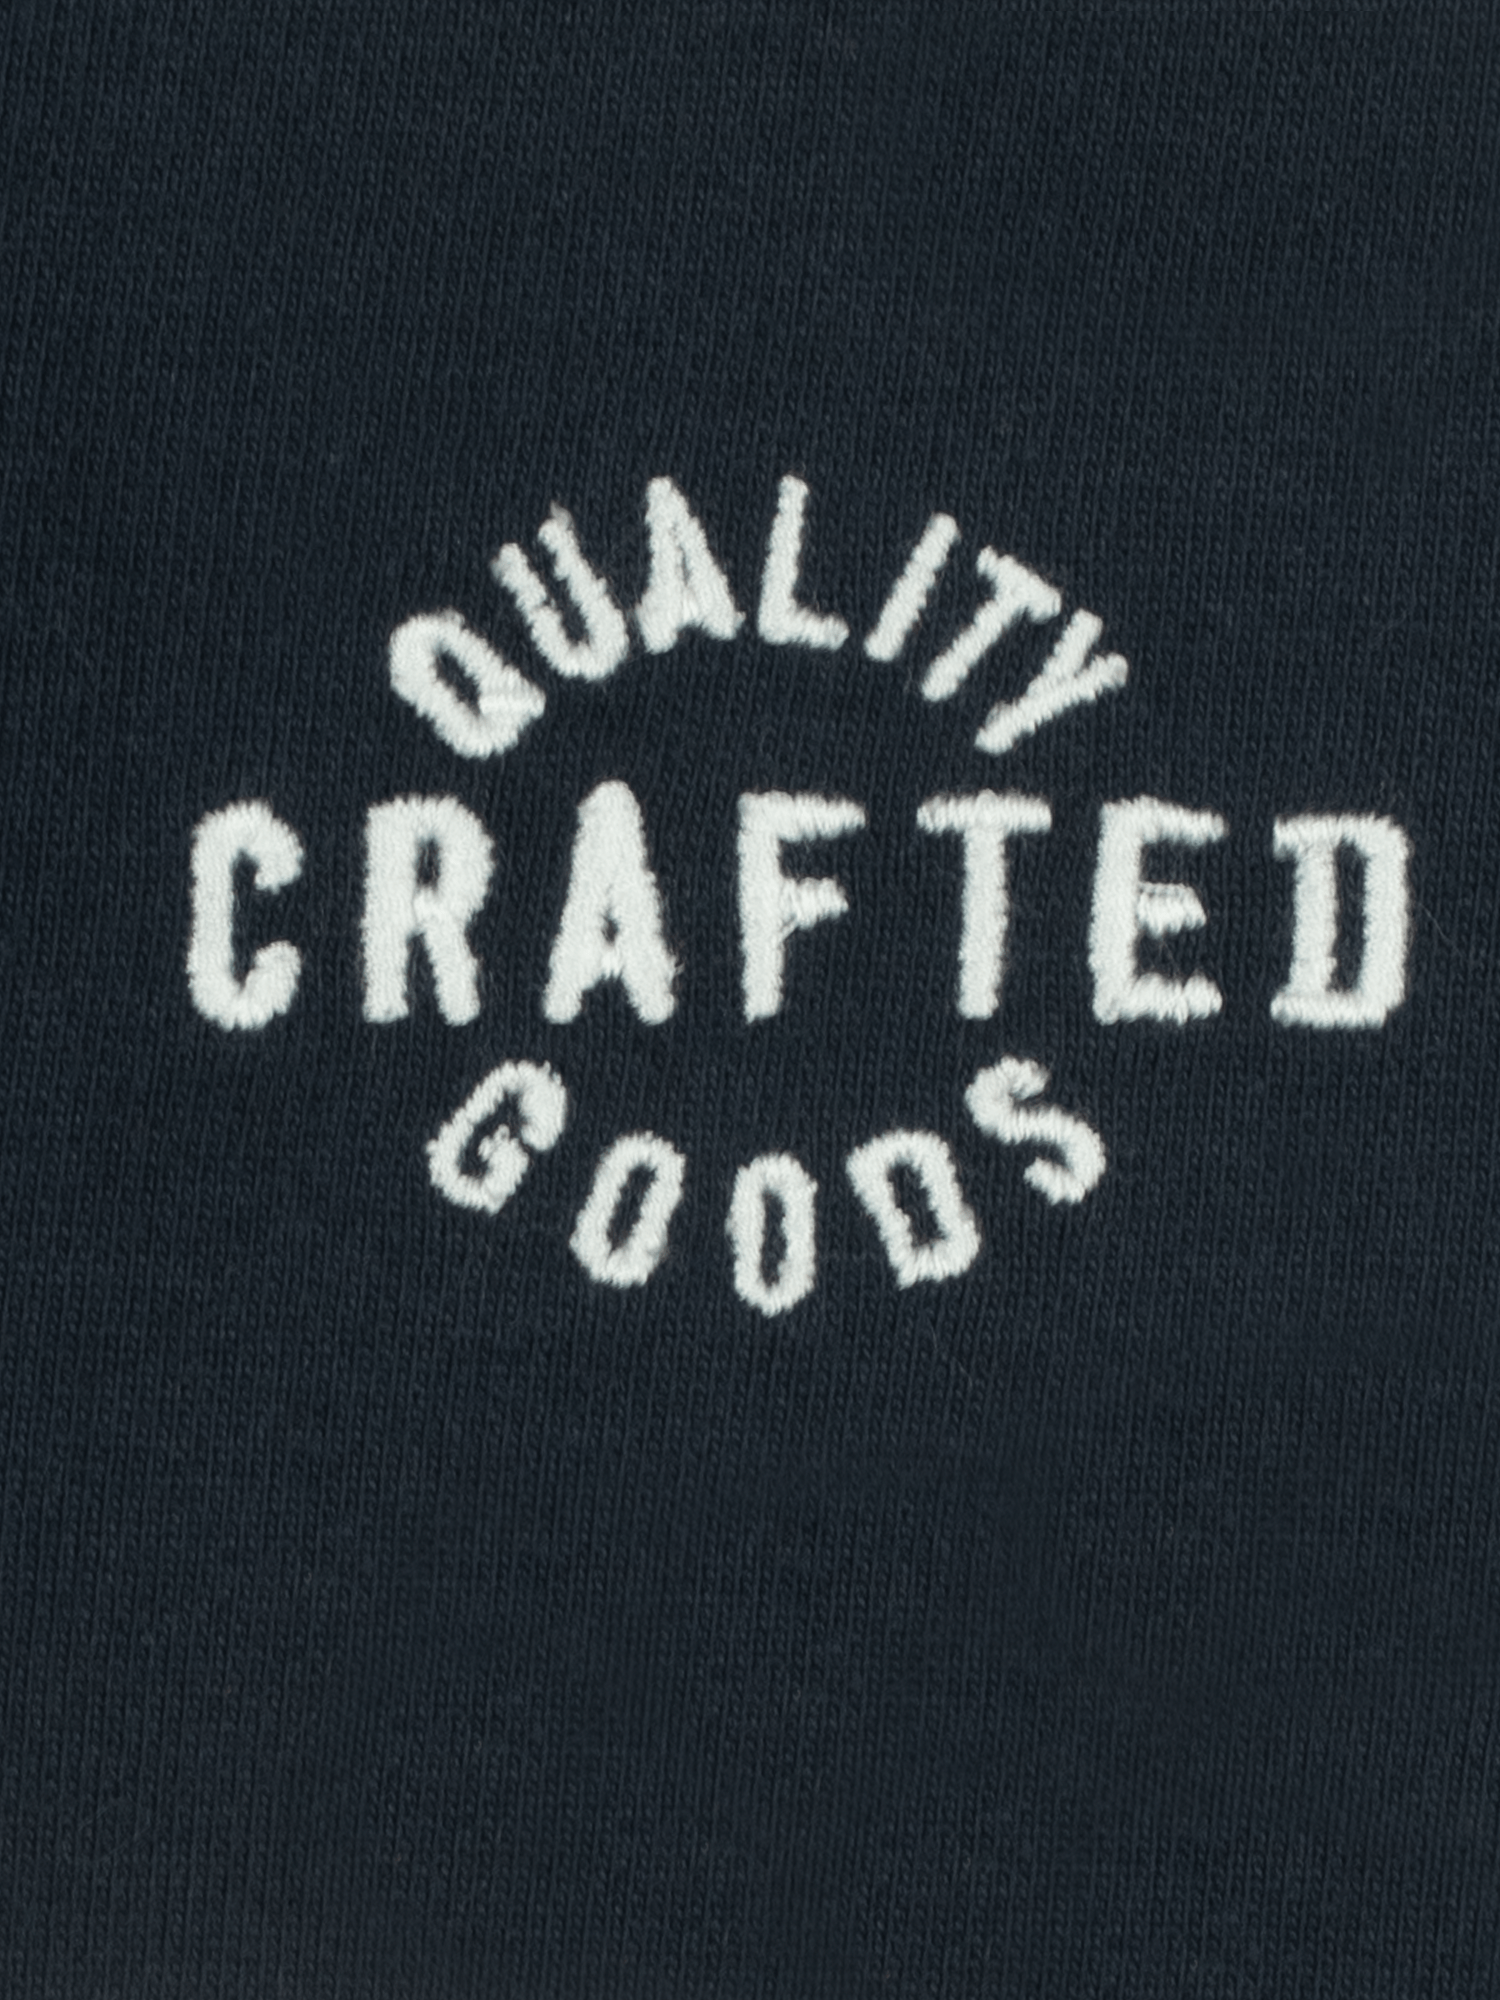 Stone Harbor MEN'S QUALITY CRAFTED GOODS